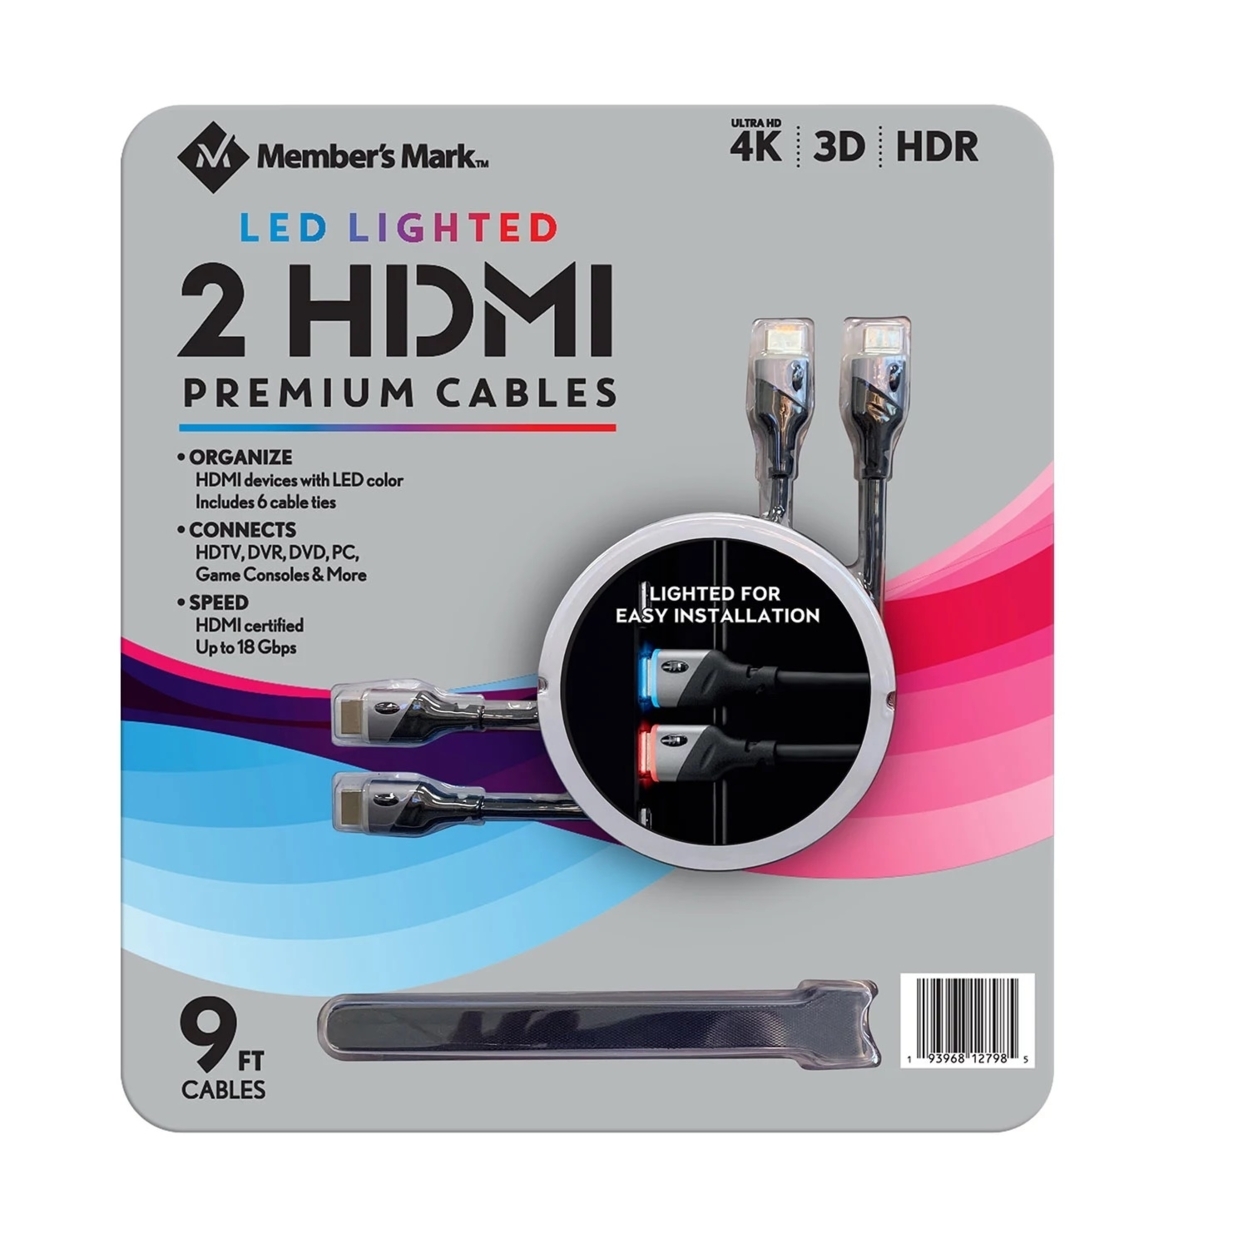 Member's Mark 9' LED Lighted HDMI Premium Cables